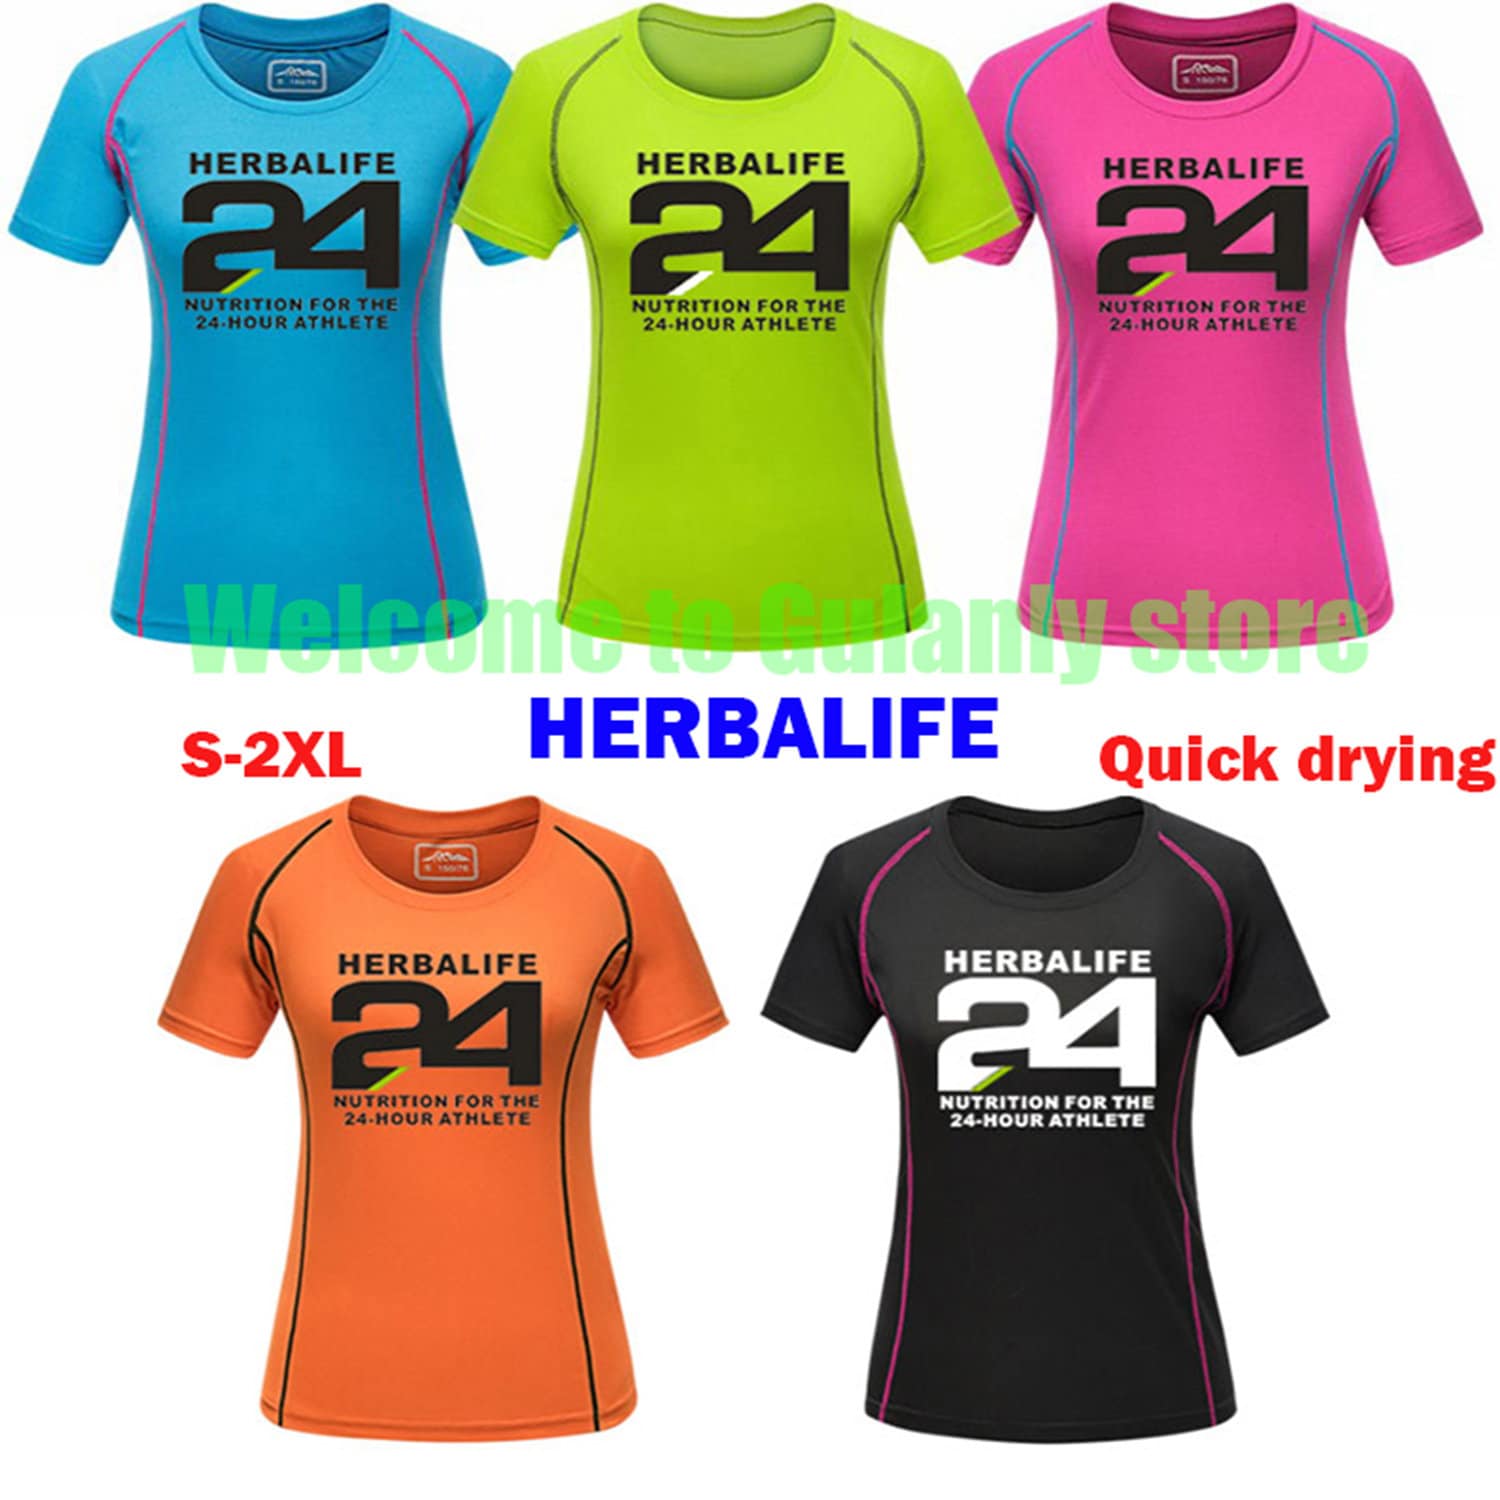 Private Order S-2XL Quick-drying Tee Herbalife Women's Polo Shirt Slim  Casual Lapel Short Sleeve Shirt Top Sports Golf Tennis 